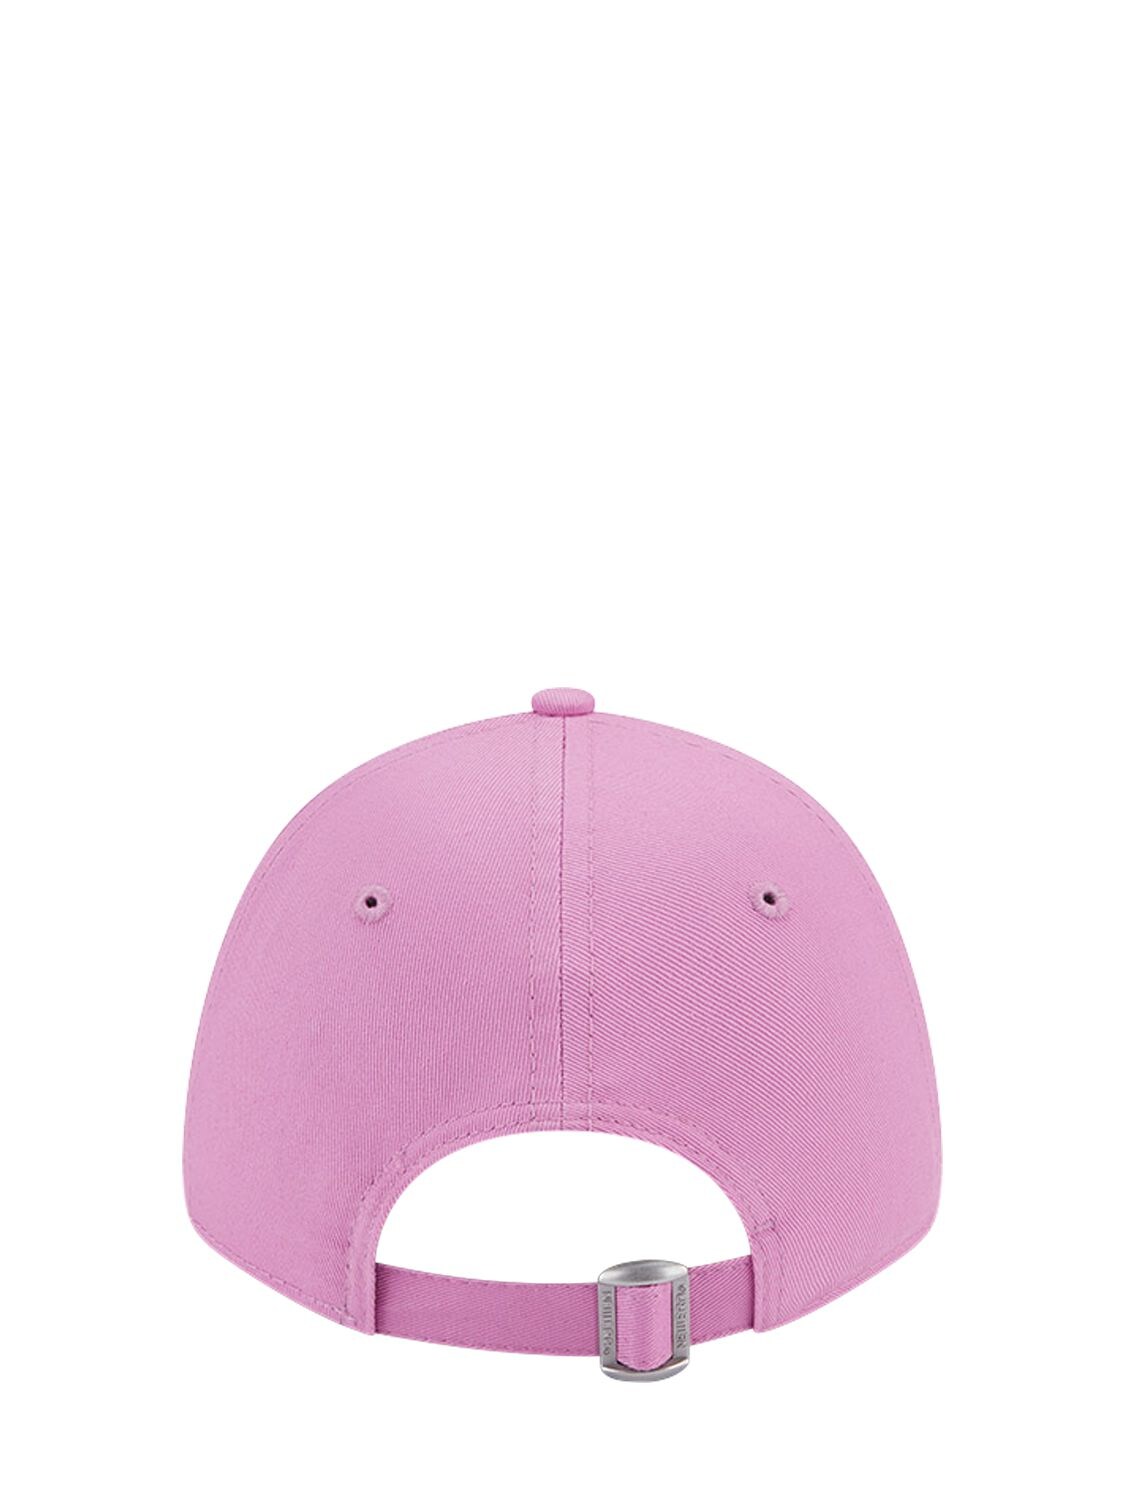 Shop New Era Female League Ess 9forty Ny Yankees Cap In Pink,white